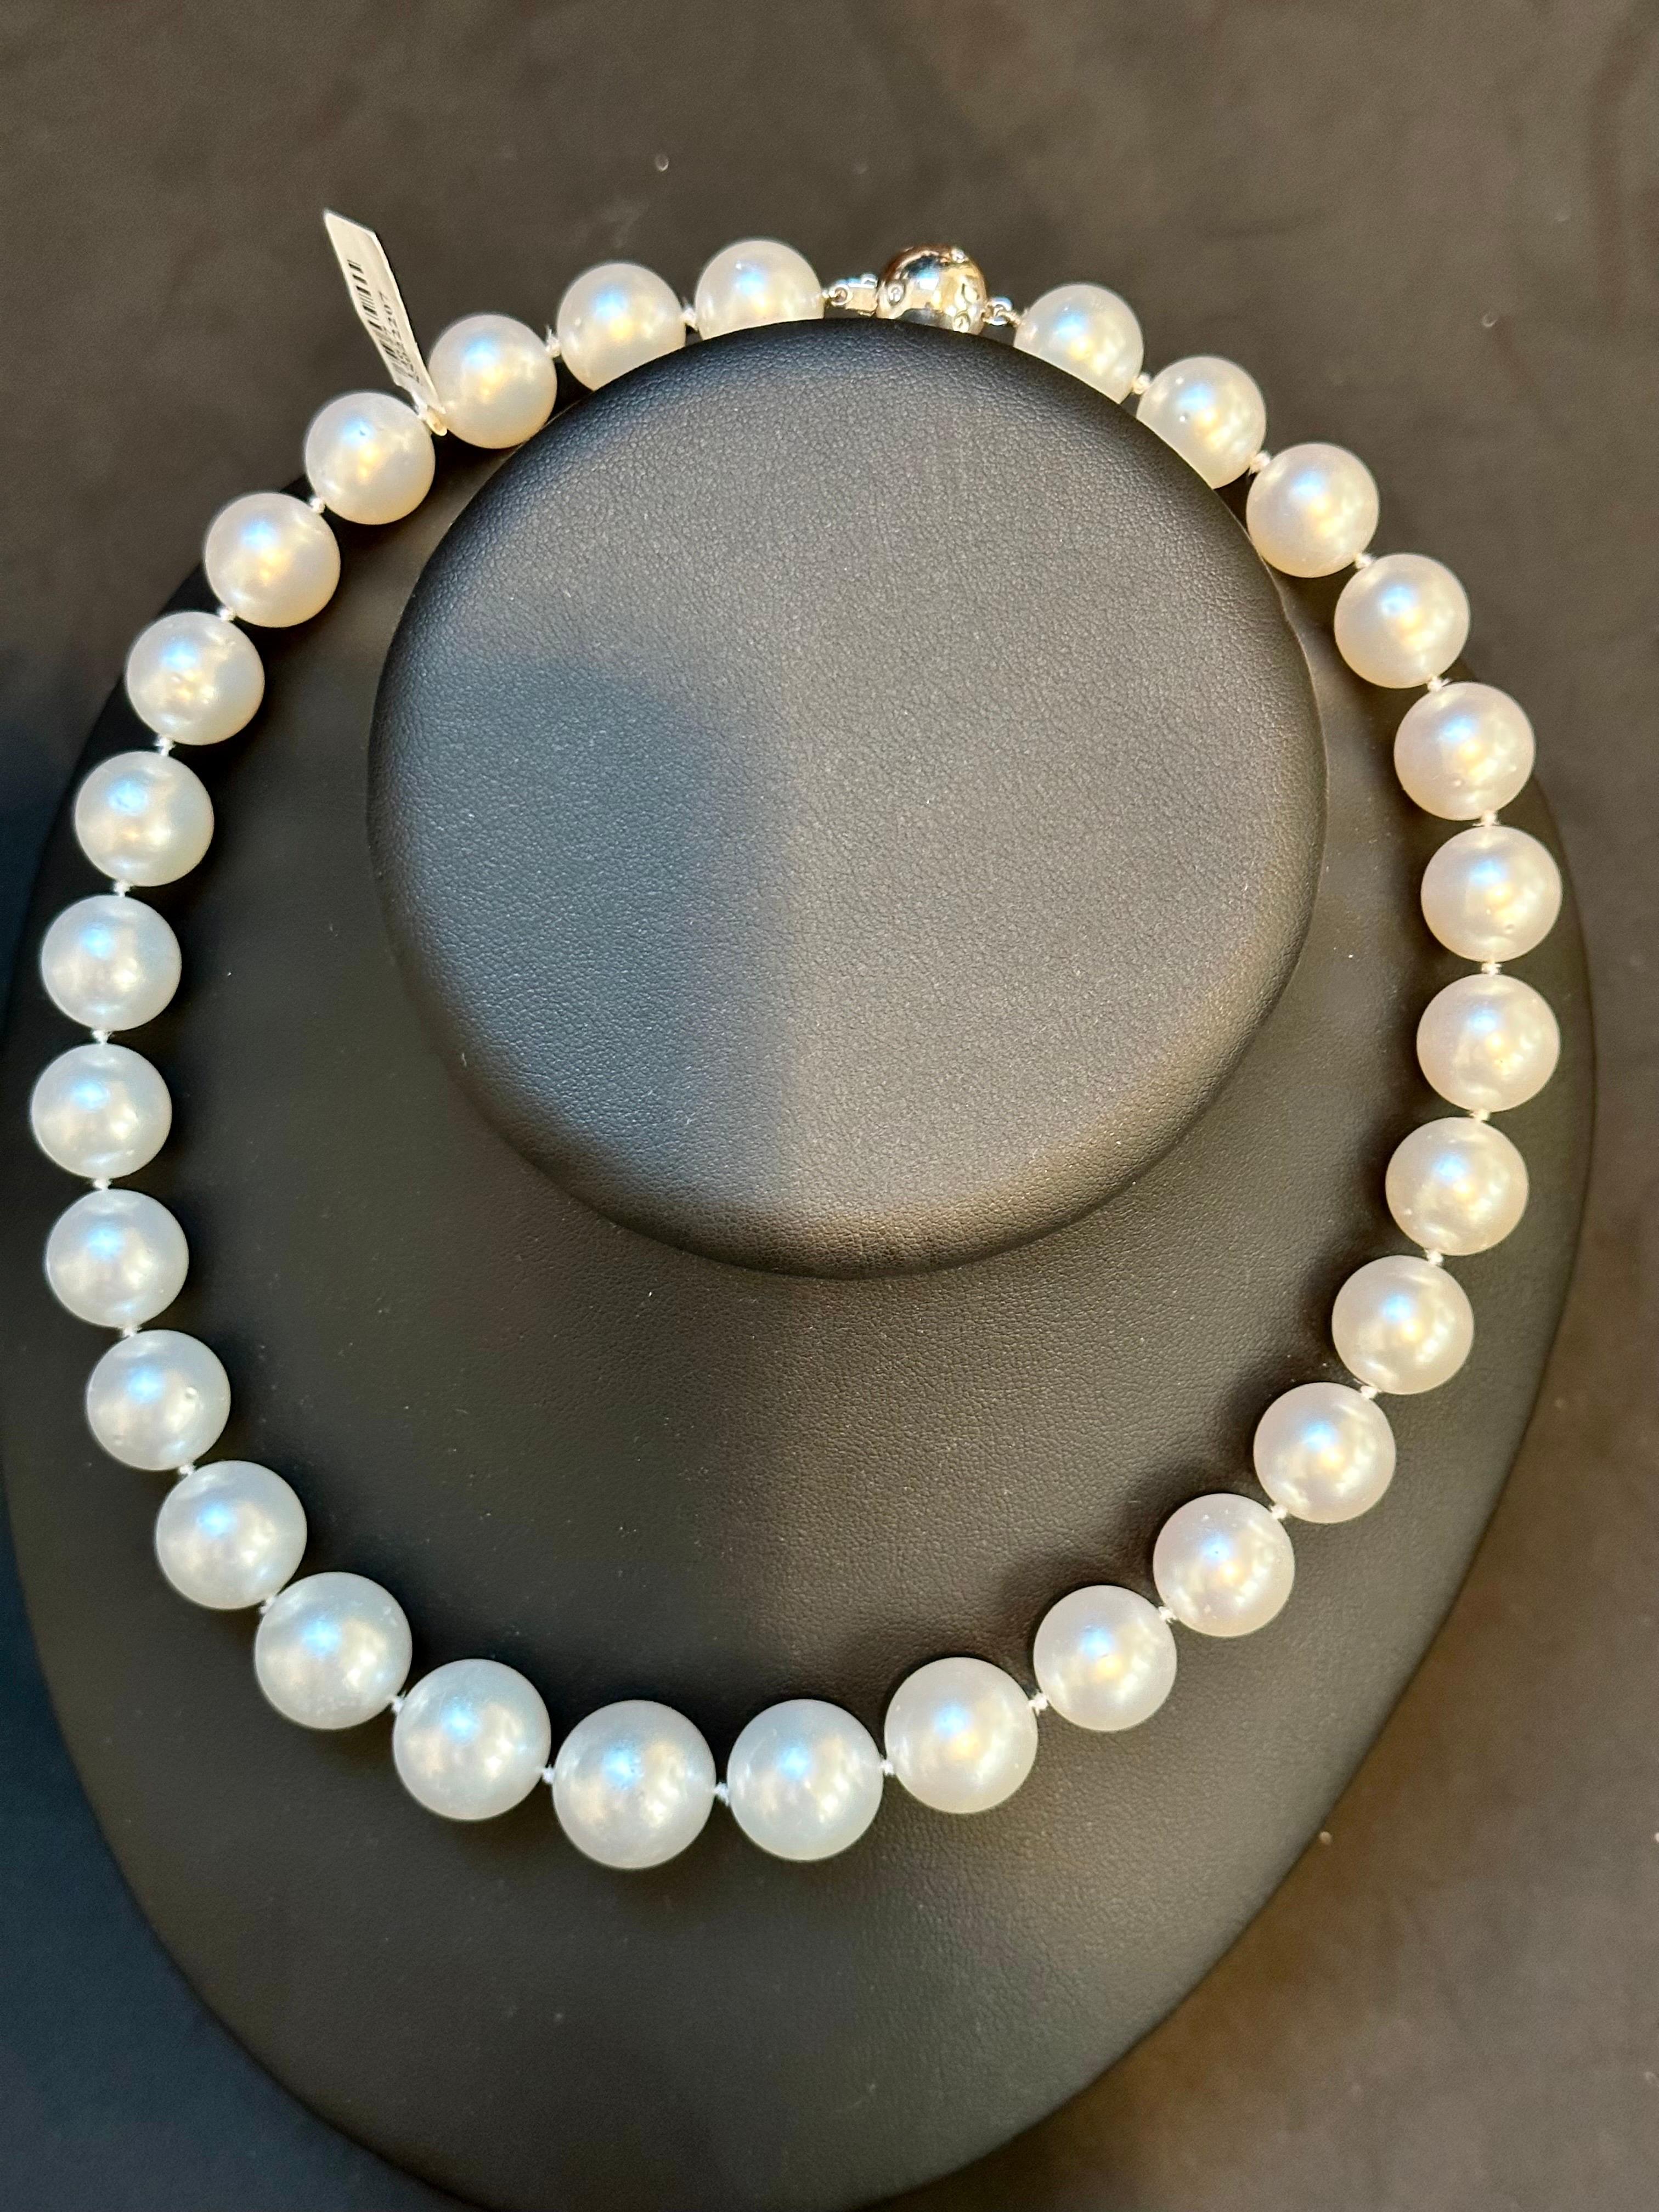 13-16.5mm White South Sea Round Pearl Necklace - AAA Quality, 29 Pieces +Diamond In Excellent Condition For Sale In New York, NY